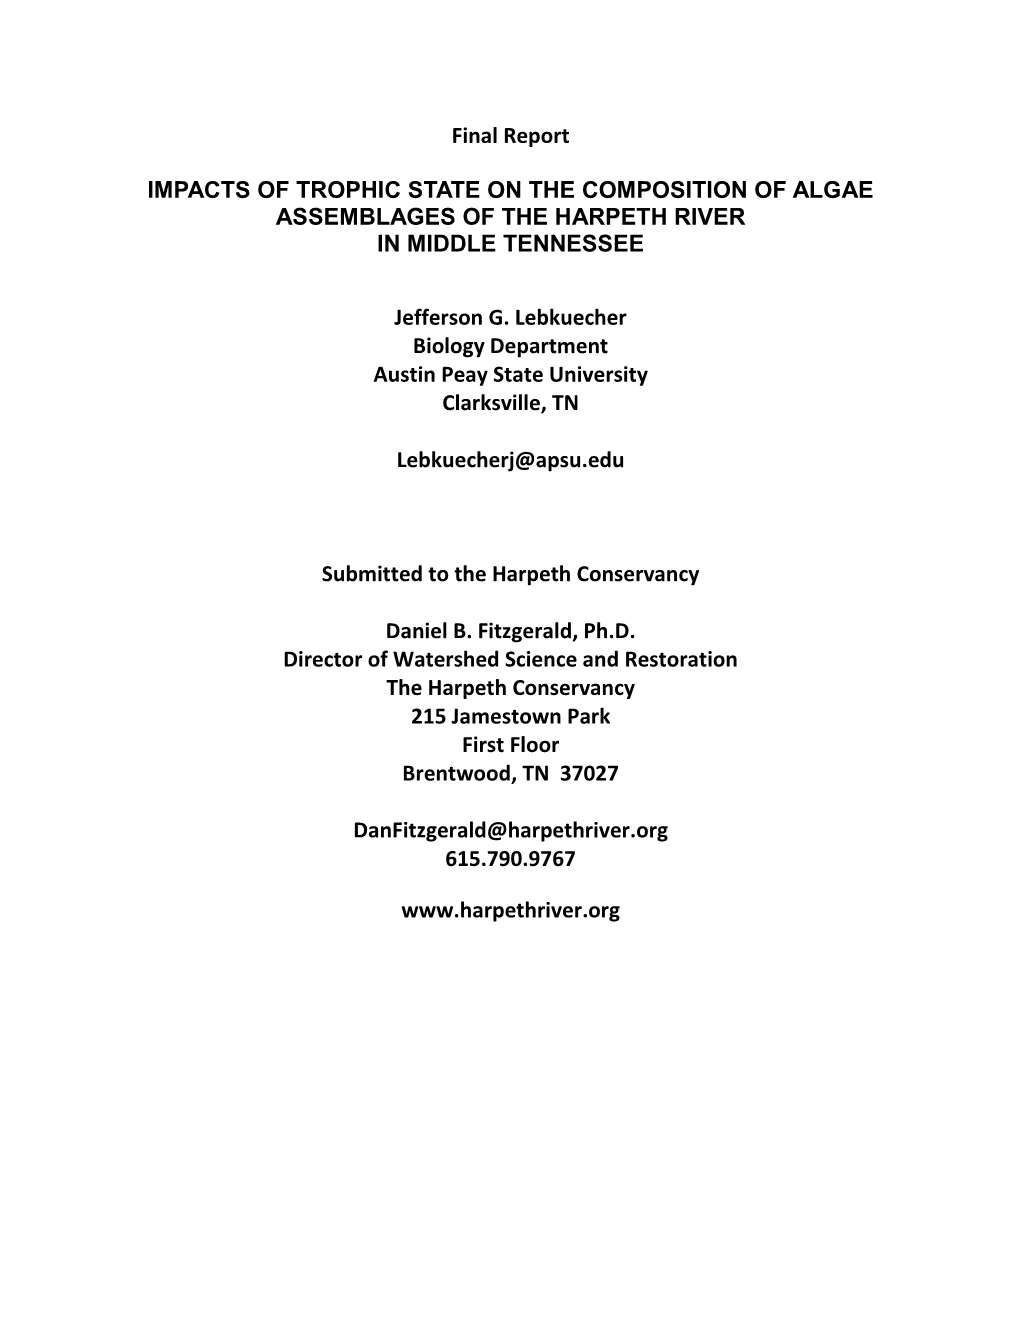 Final Report IMPACTS of TROPHIC STATE on the COMPOSITION OF